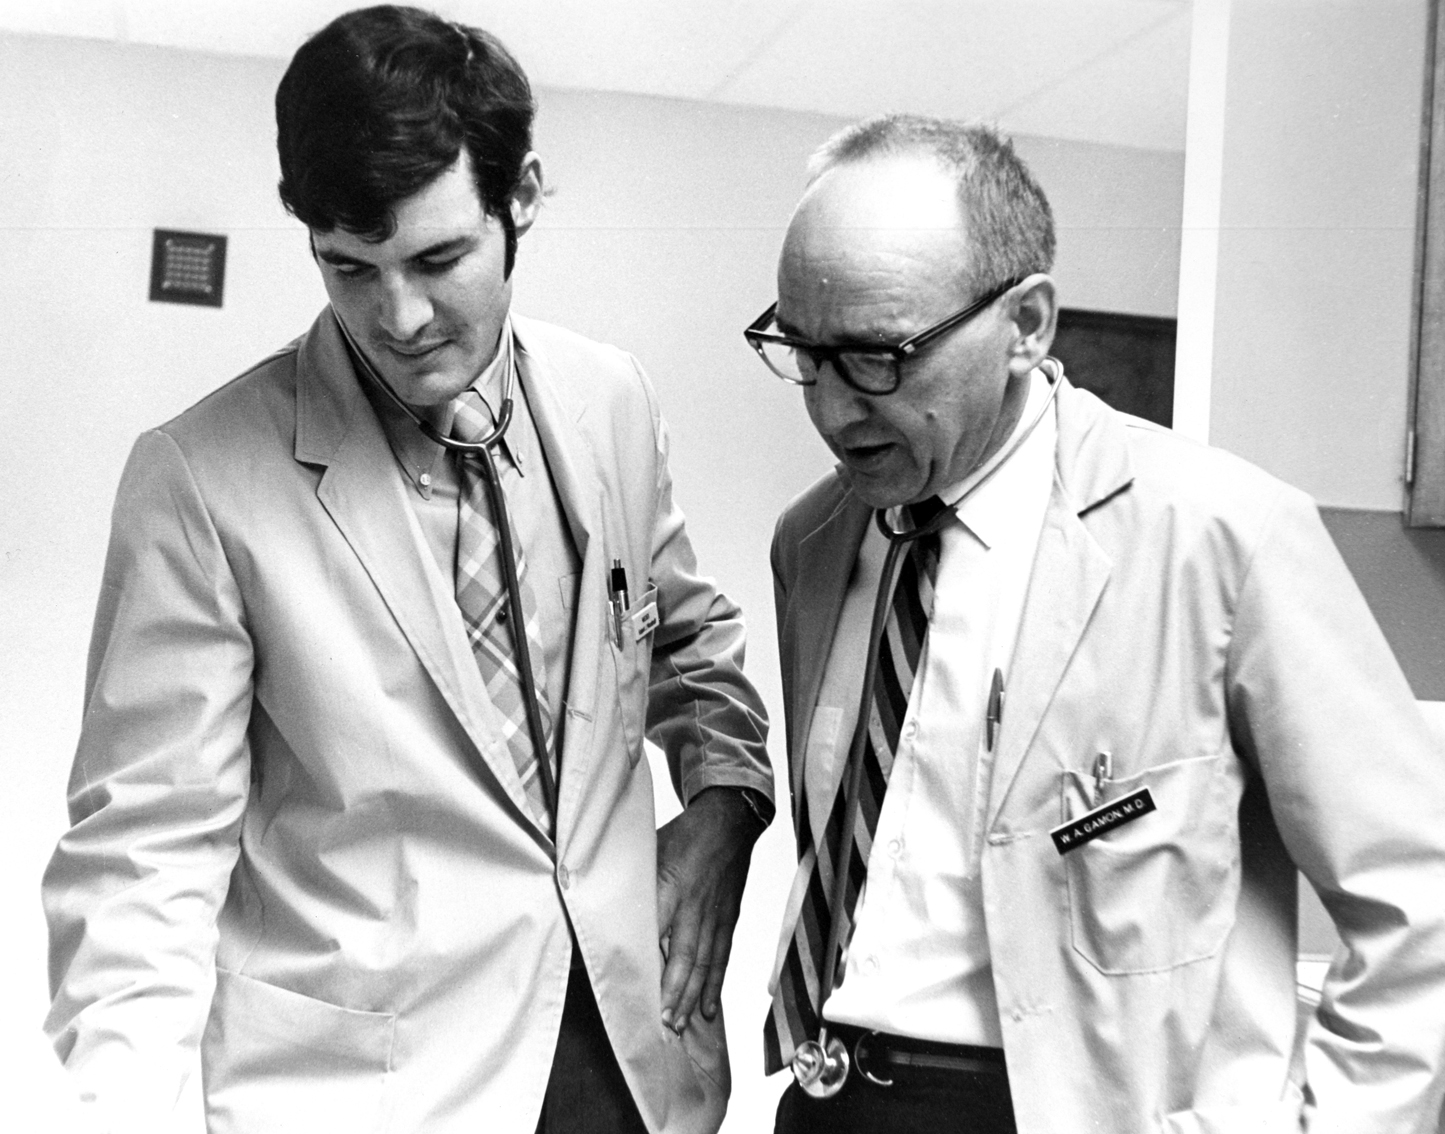 Bob Woodruff of MEDEX Seattle Class 1 with his preceptor, Dr. Gamon at the Cheney Clinic in 1968.